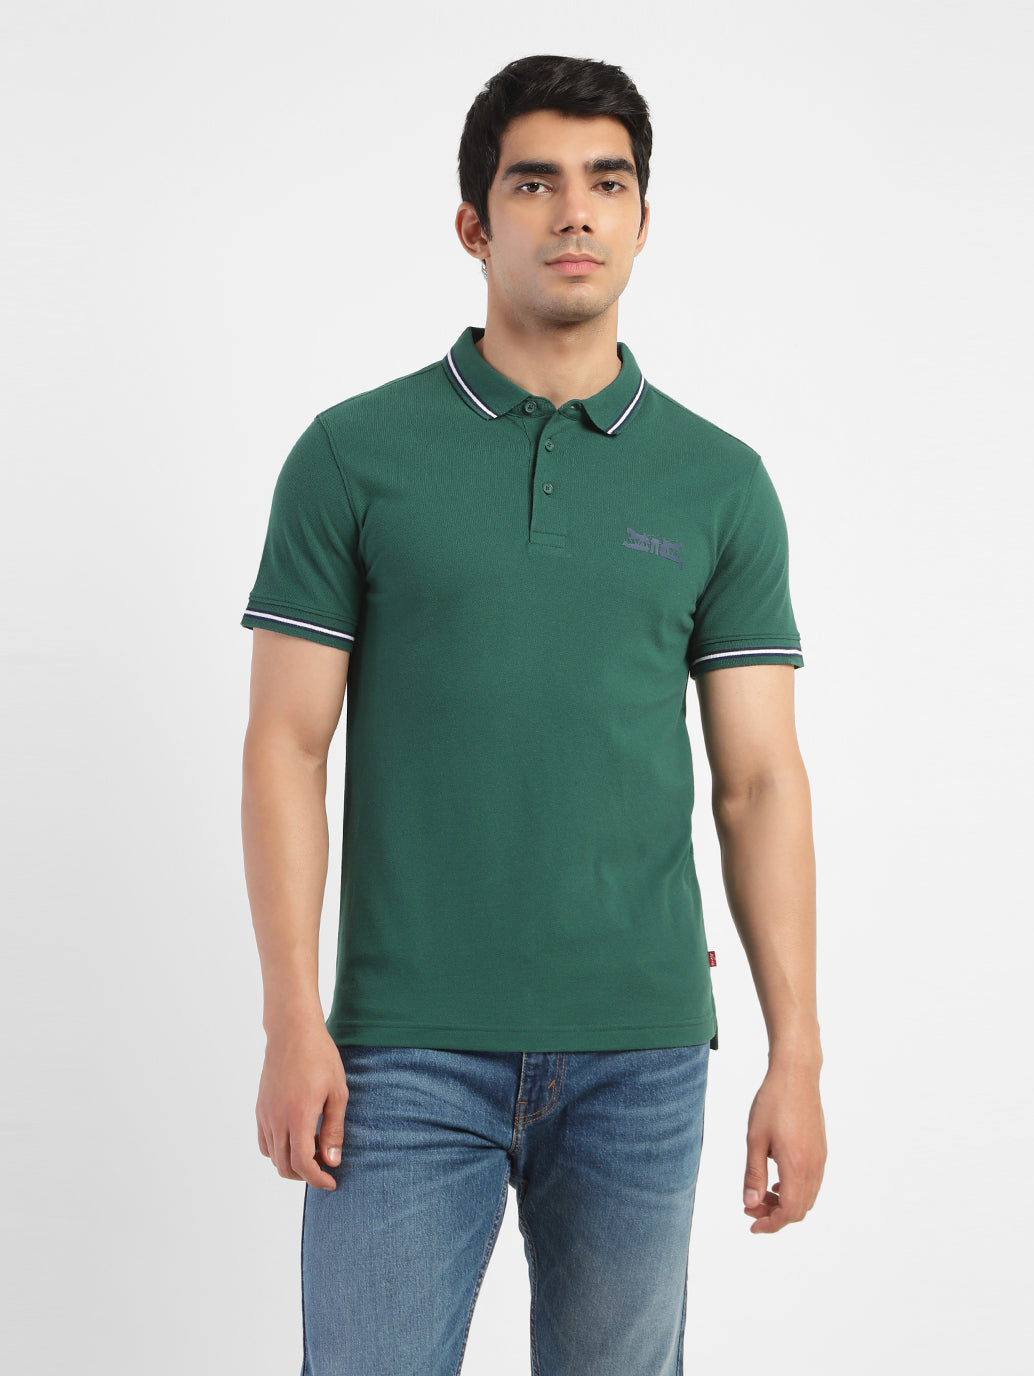 Men's Solid Polo T-shirt Green